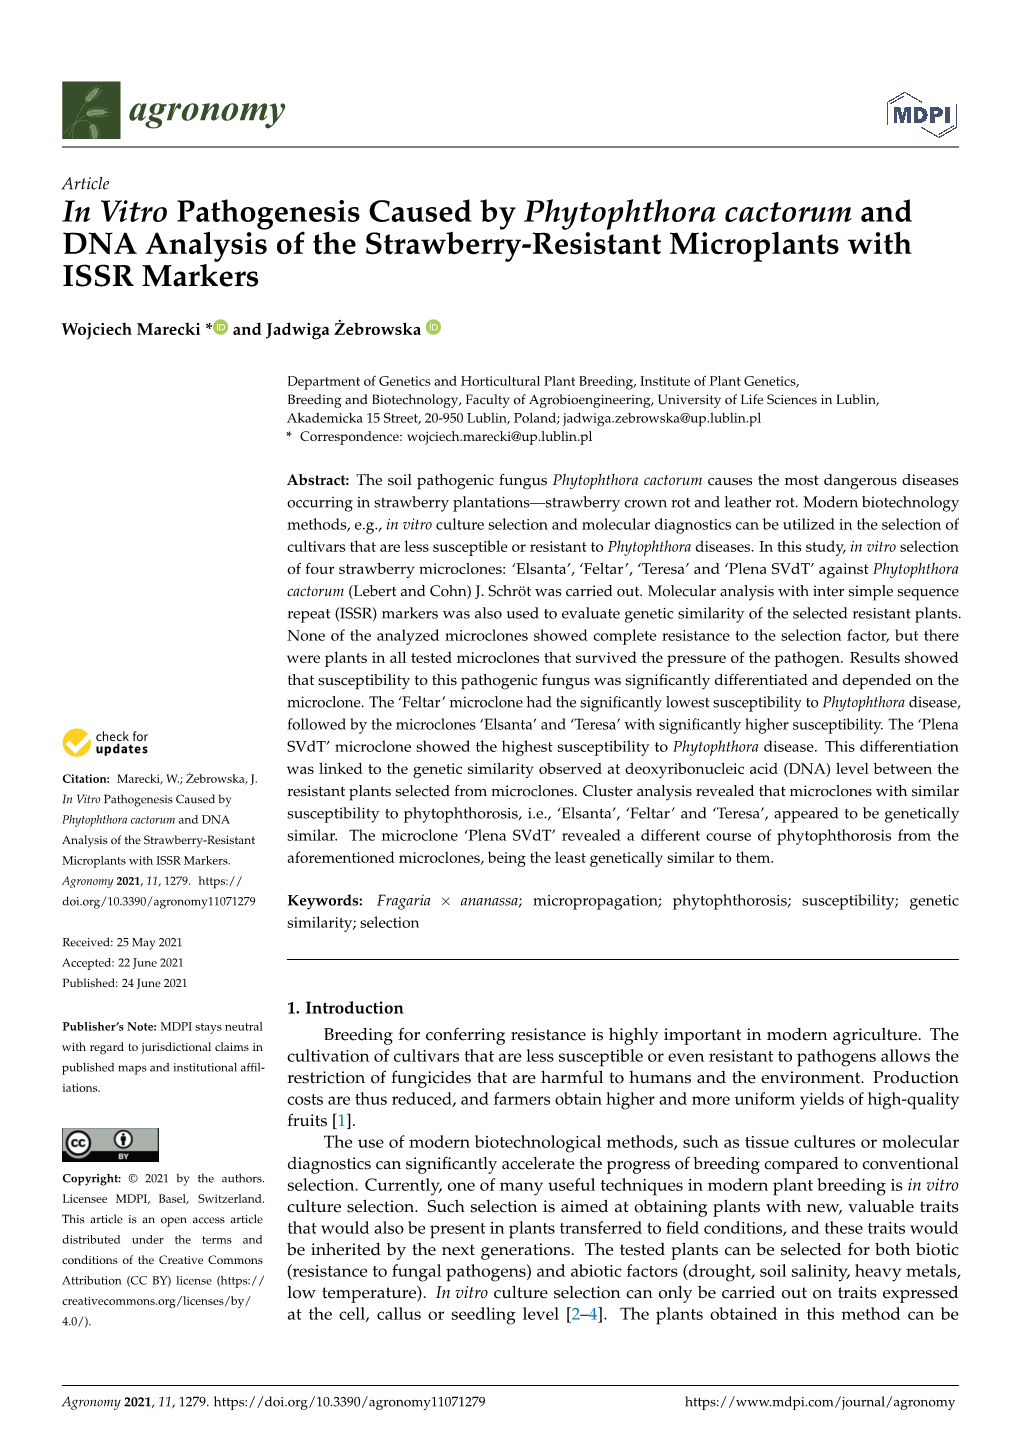 In Vitro Pathogenesis Caused by Phytophthora Cactorum and DNA Analysis of the Strawberry-Resistant Microplants with ISSR Markers